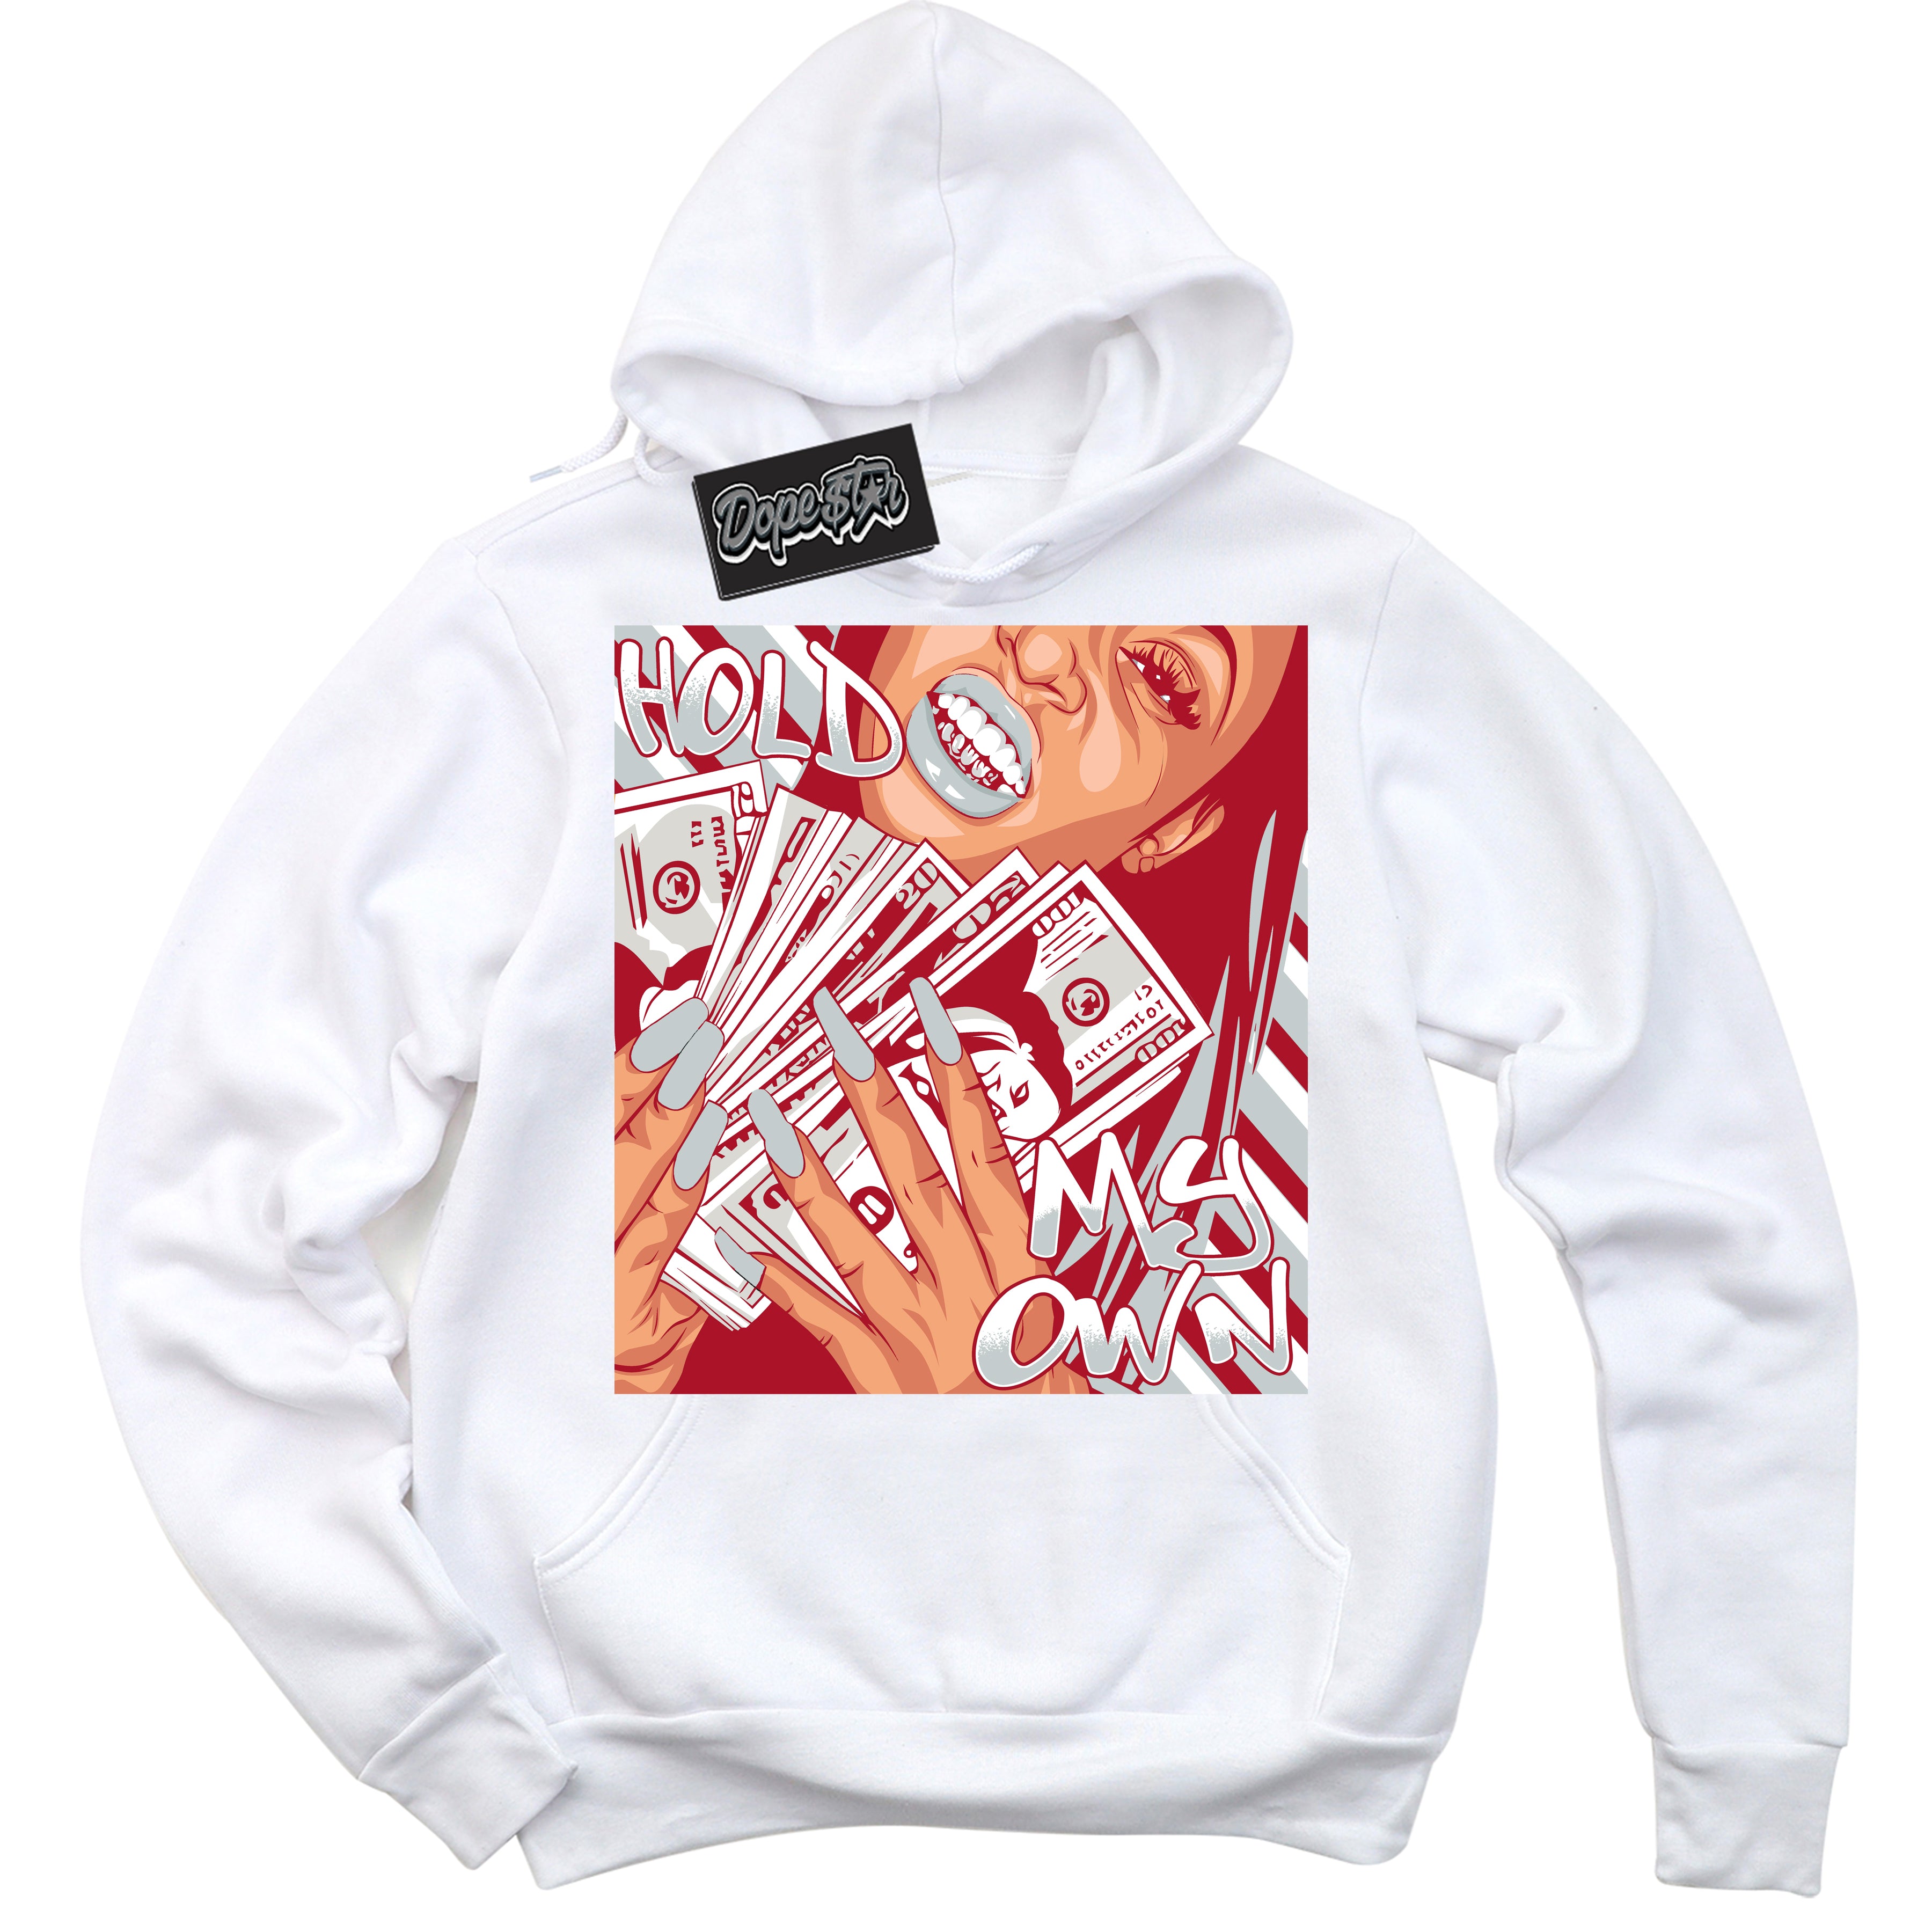 Cool Black Hoodie with “ Hold My Own ”  design that Perfectly Matches  Reverse Ultraman Sneakers.